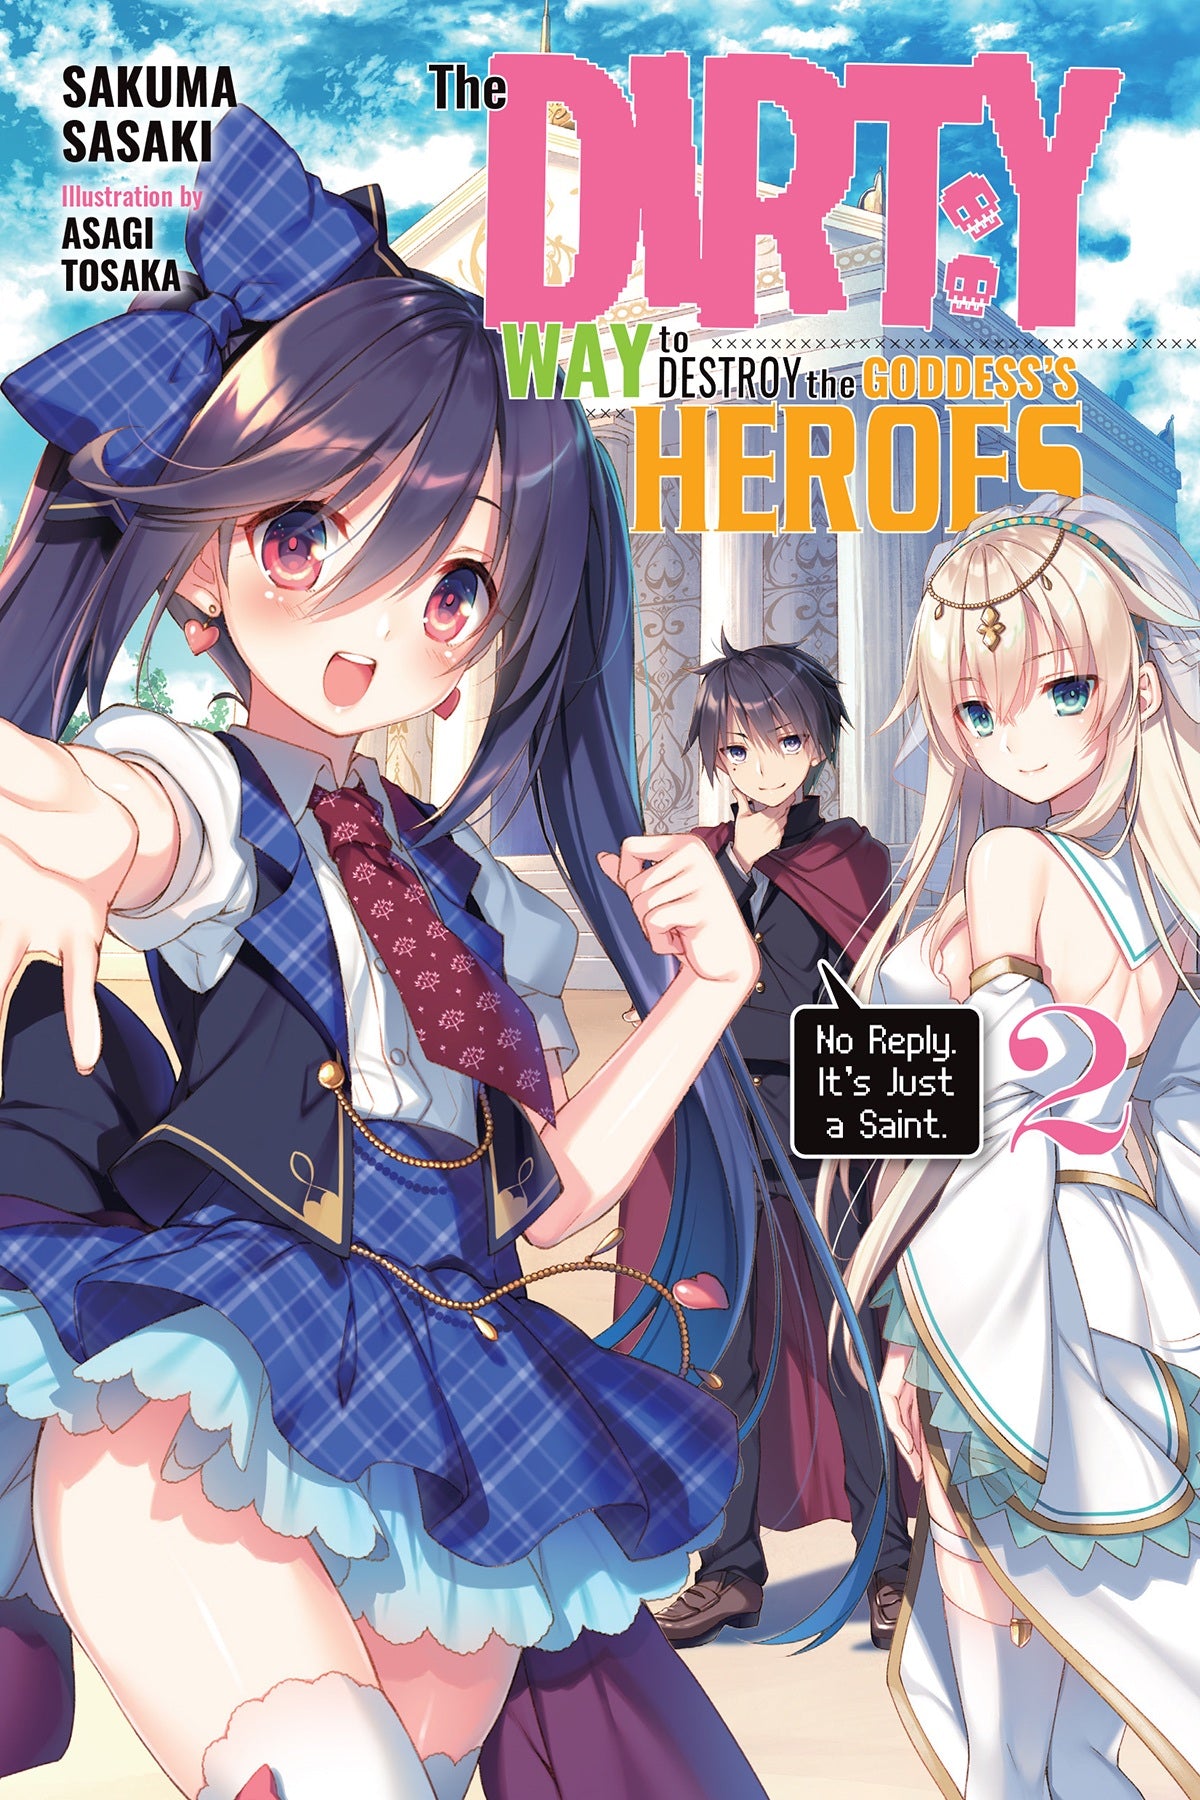 The Dirty Way to Destroy the Goddess's Heroes Vol. 02 (Light Novel): No Reply. It's Just a Saint.